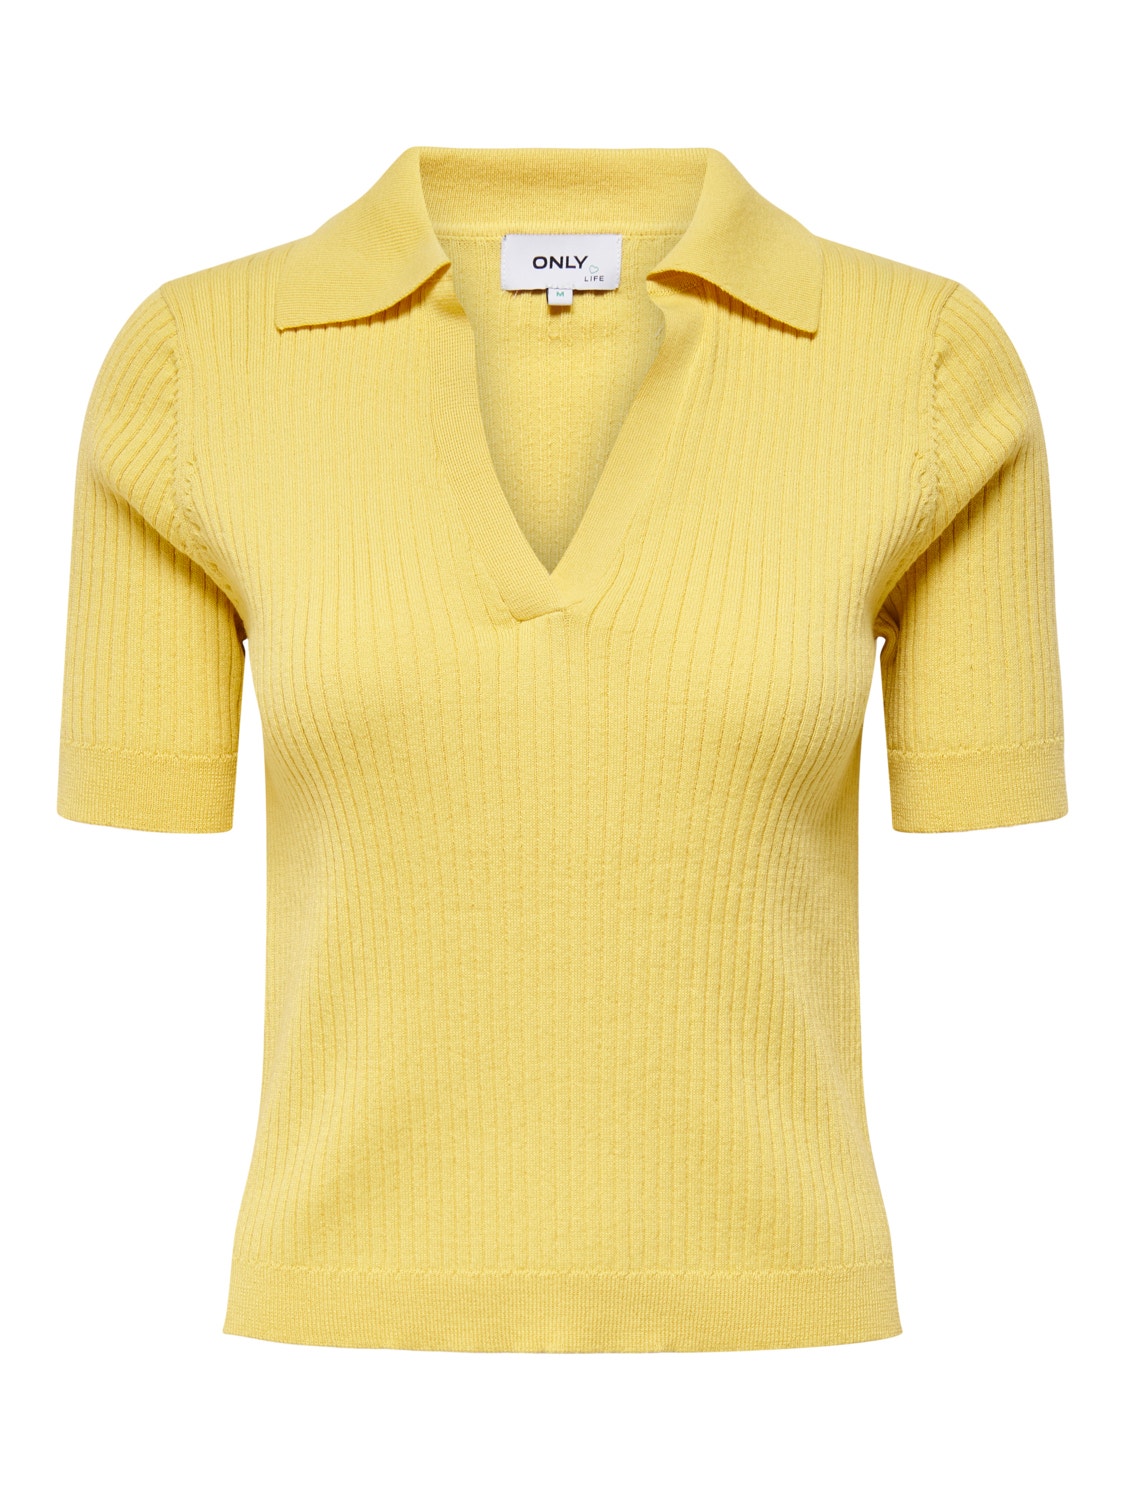 ONLY Short sleeved polo Knitted Pullover -Straw - 15255862